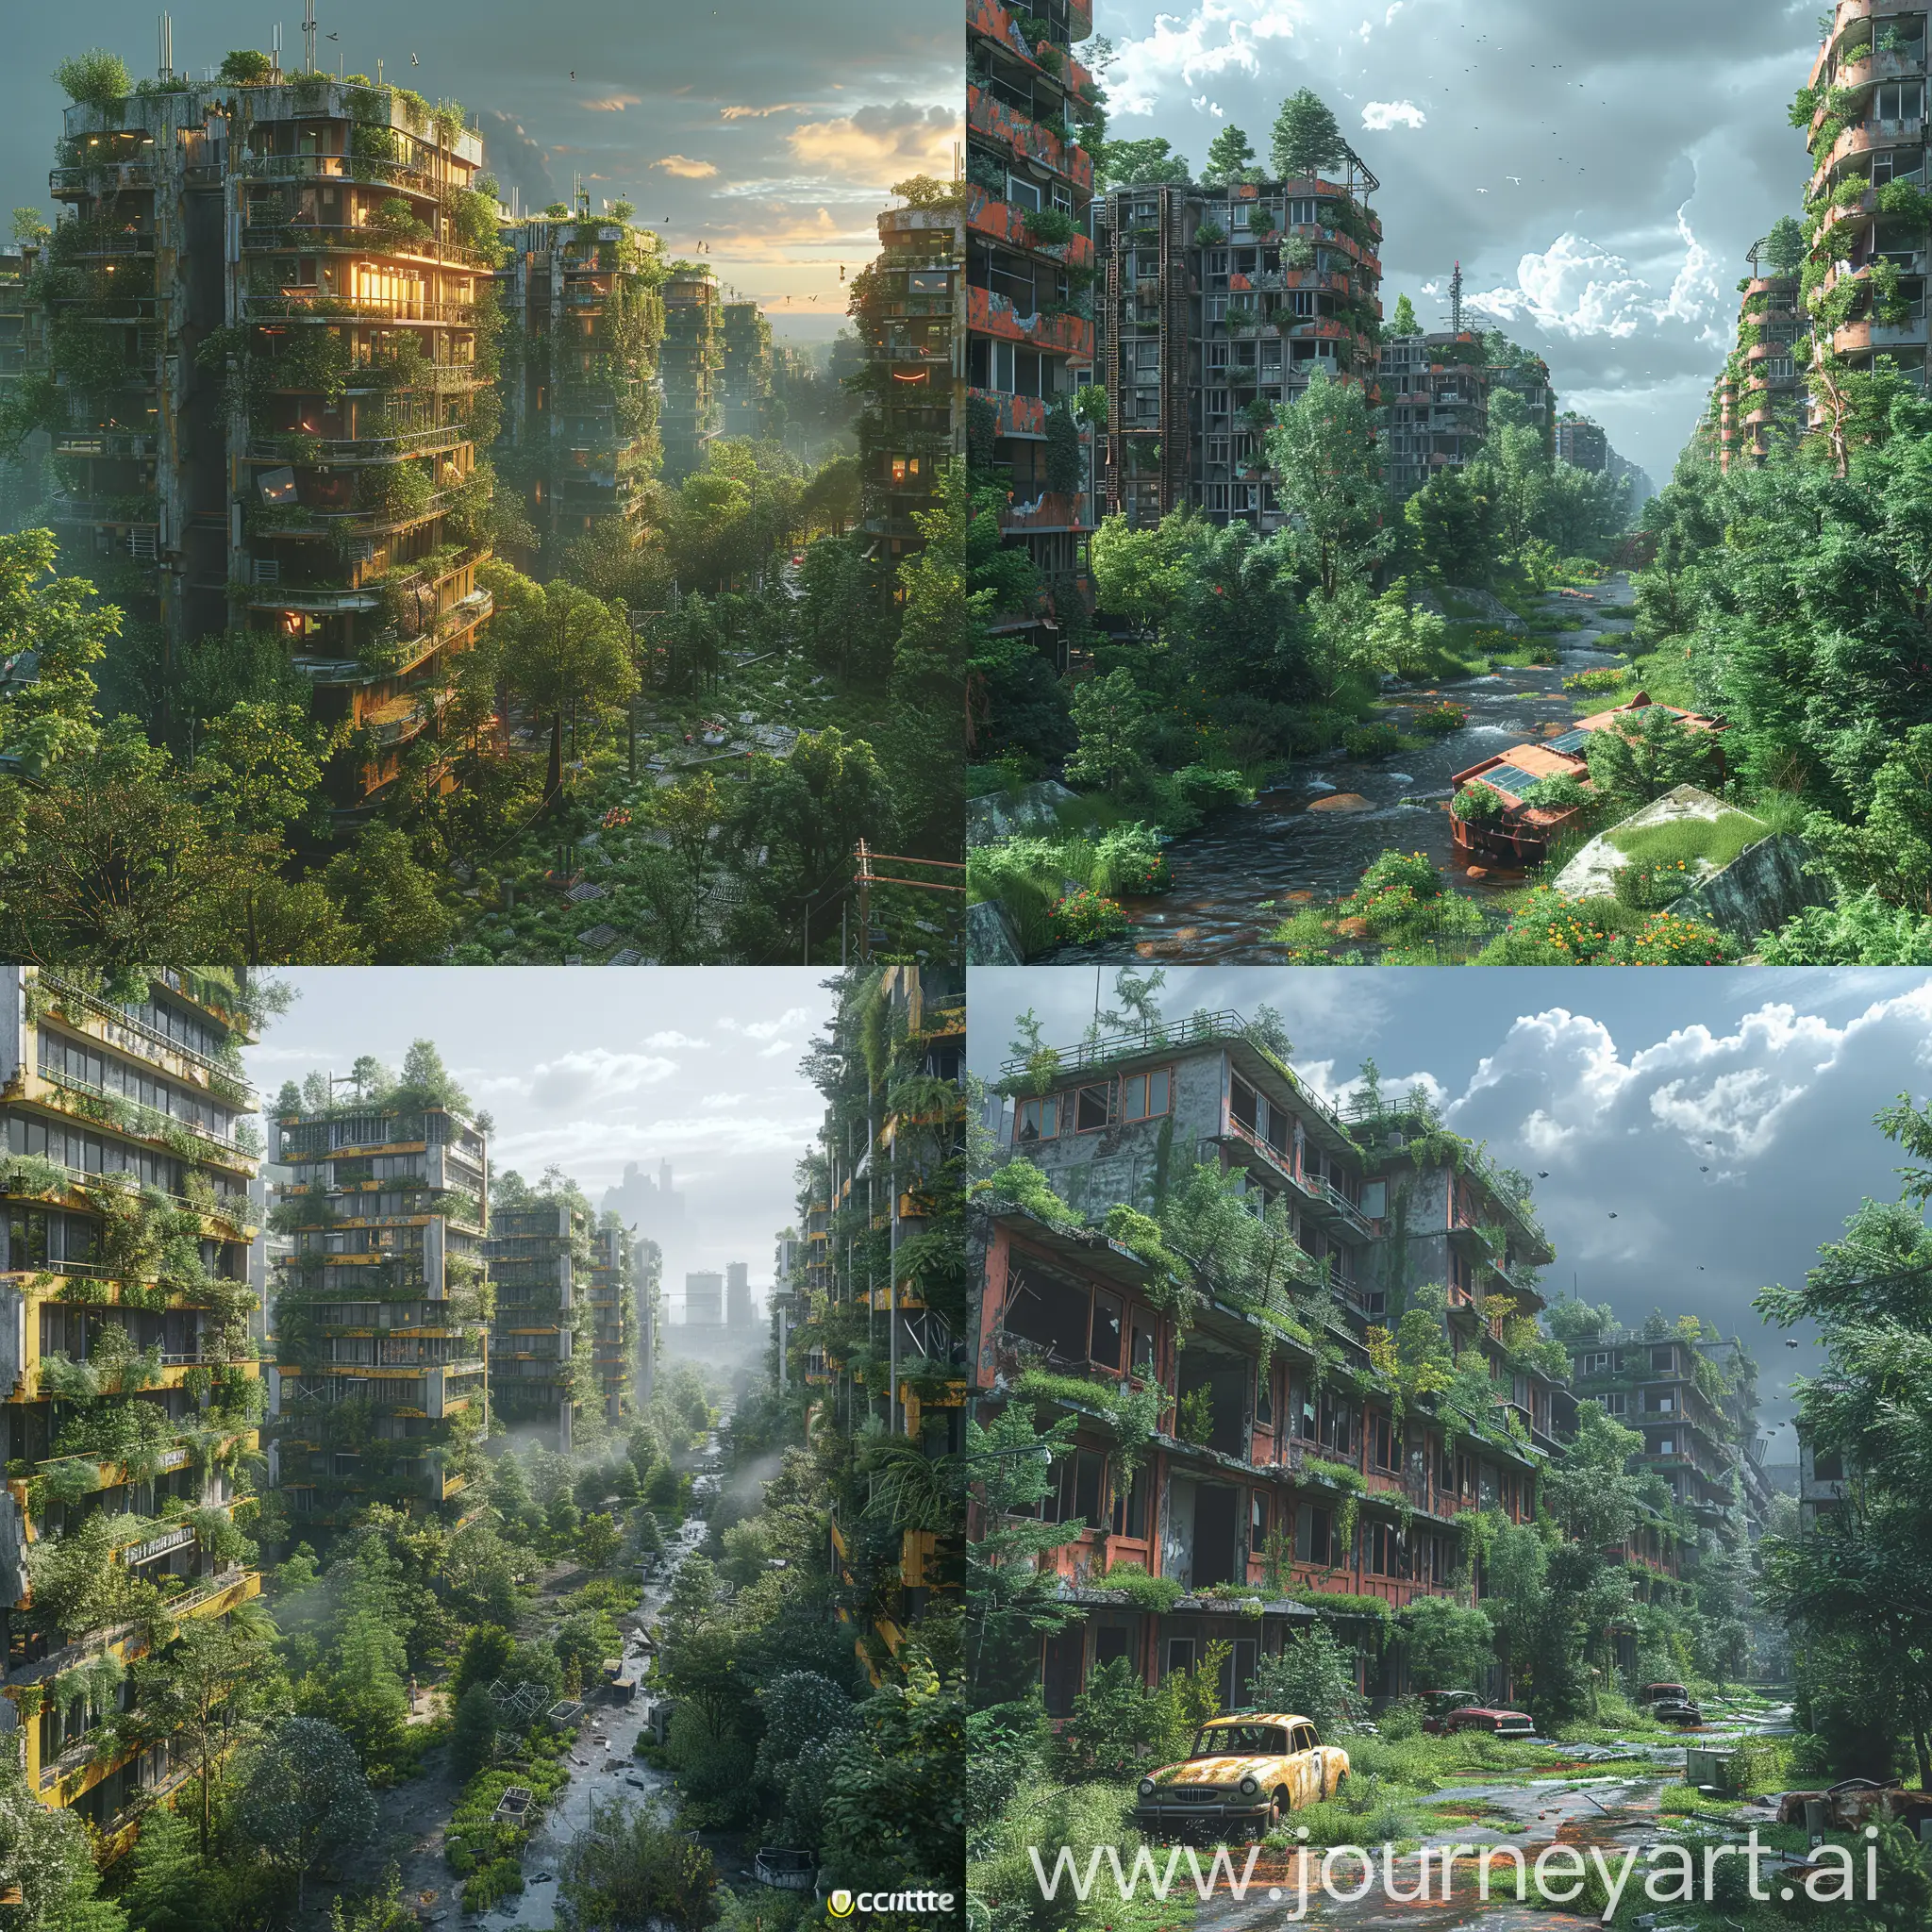 Ultramodern, futuristic Pripyat, Phytoremediation, Solar Power Plants, Geothermal Energy, Vertical Forests, Self-Sustaining Buildings, Waste-to-Energy Plants, Electric Vehicles, Green Roofs and Walls, 3D-Printed Structures, Bioremediation, Smart Grid, Ubiquitous Wi-Fi, Telepresence and AR/VR Integration, Automated Transportation, Internet of Things (IoT), Augmented Reality City Guide, Advanced Robotics, Vertical Farming, Telemedicine, E-Governance, octane render --stylize 1000